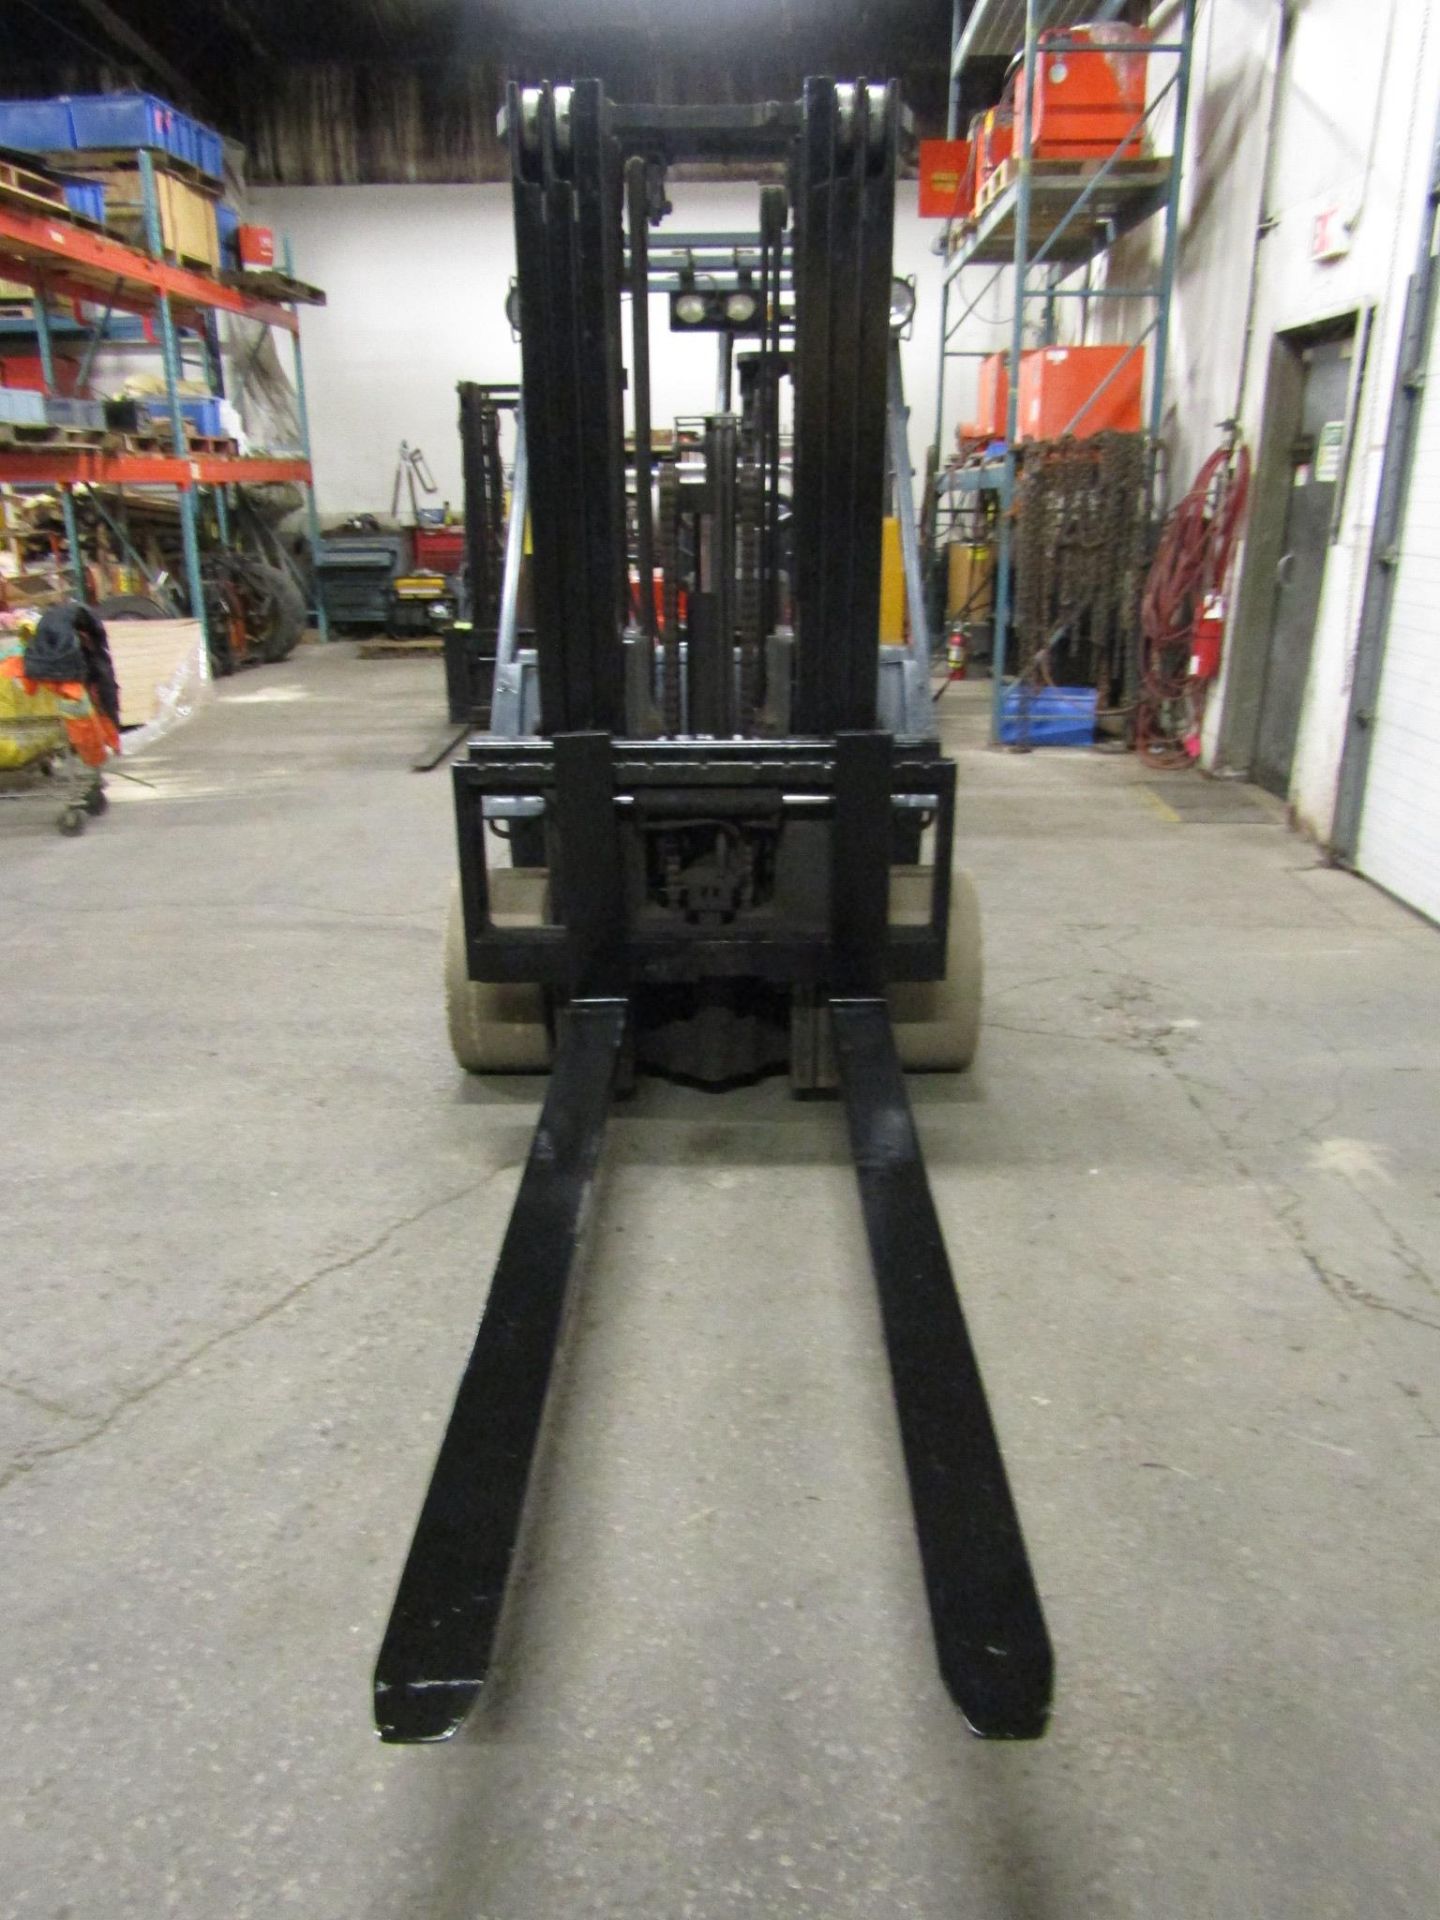 Toyota 8000lbs Capacity Forklift with 3-stage mast and sideshift with 6 FOOT forks - LPG (propane) - Image 2 of 2